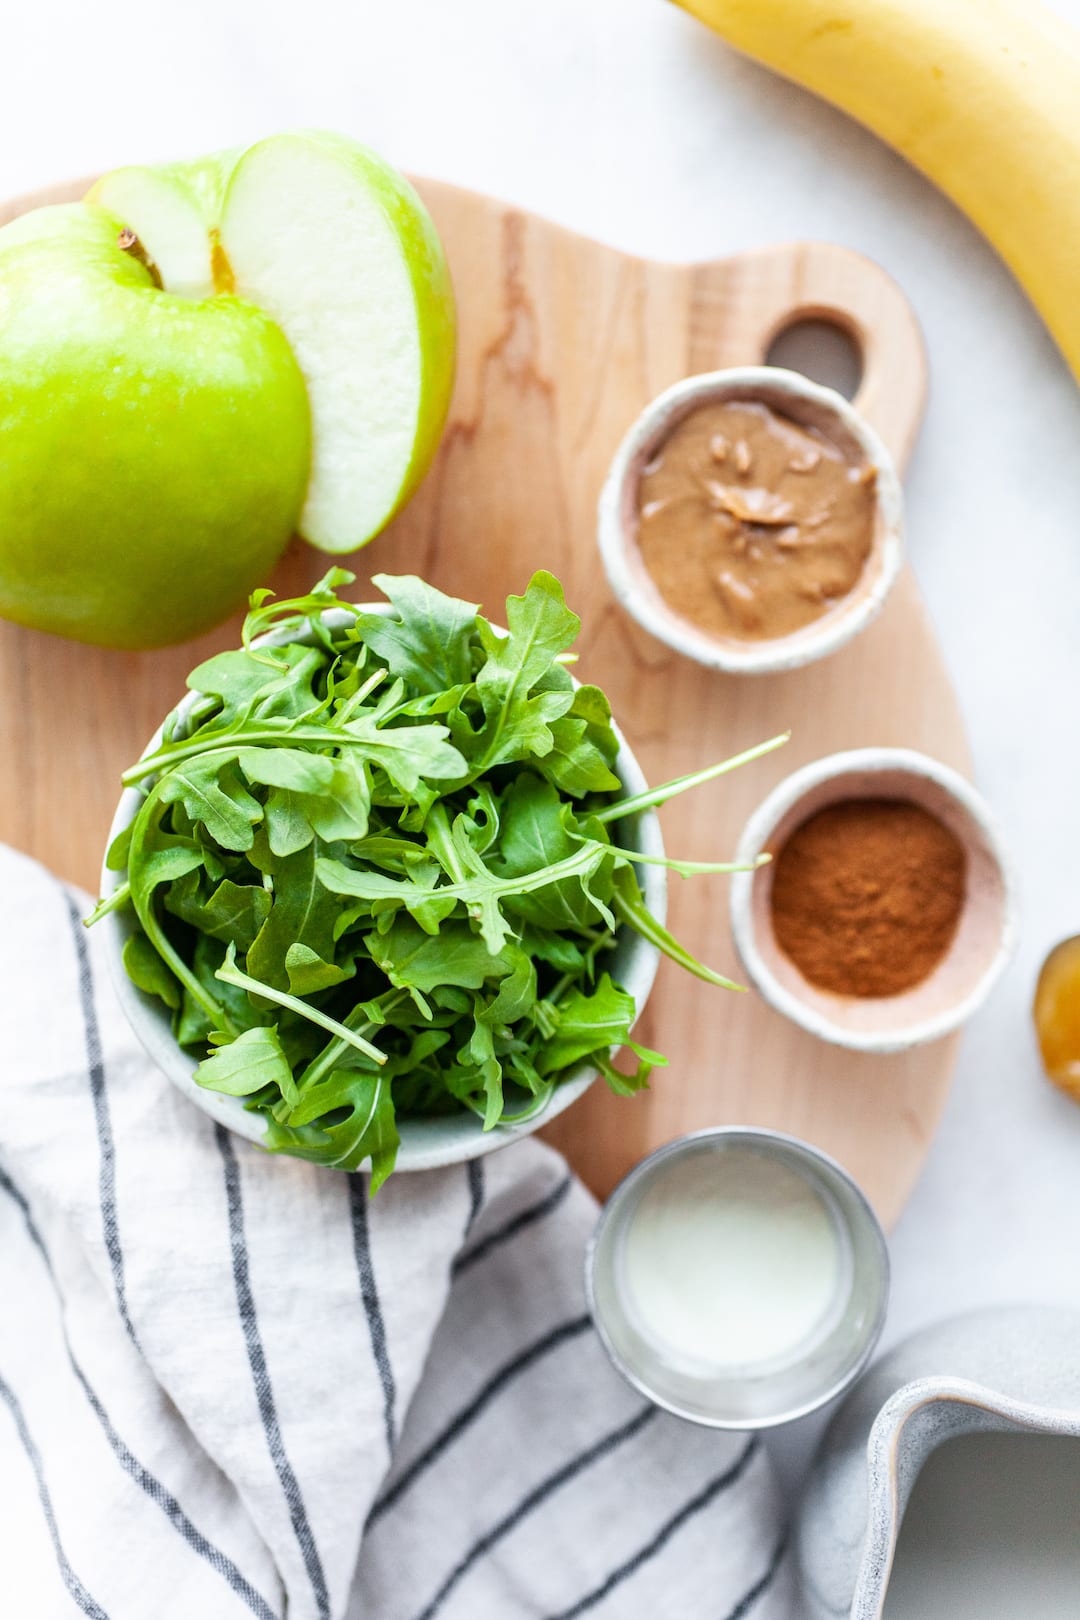 Ingredients for Delicious Arugula Smoothie Recipe spread out on a table